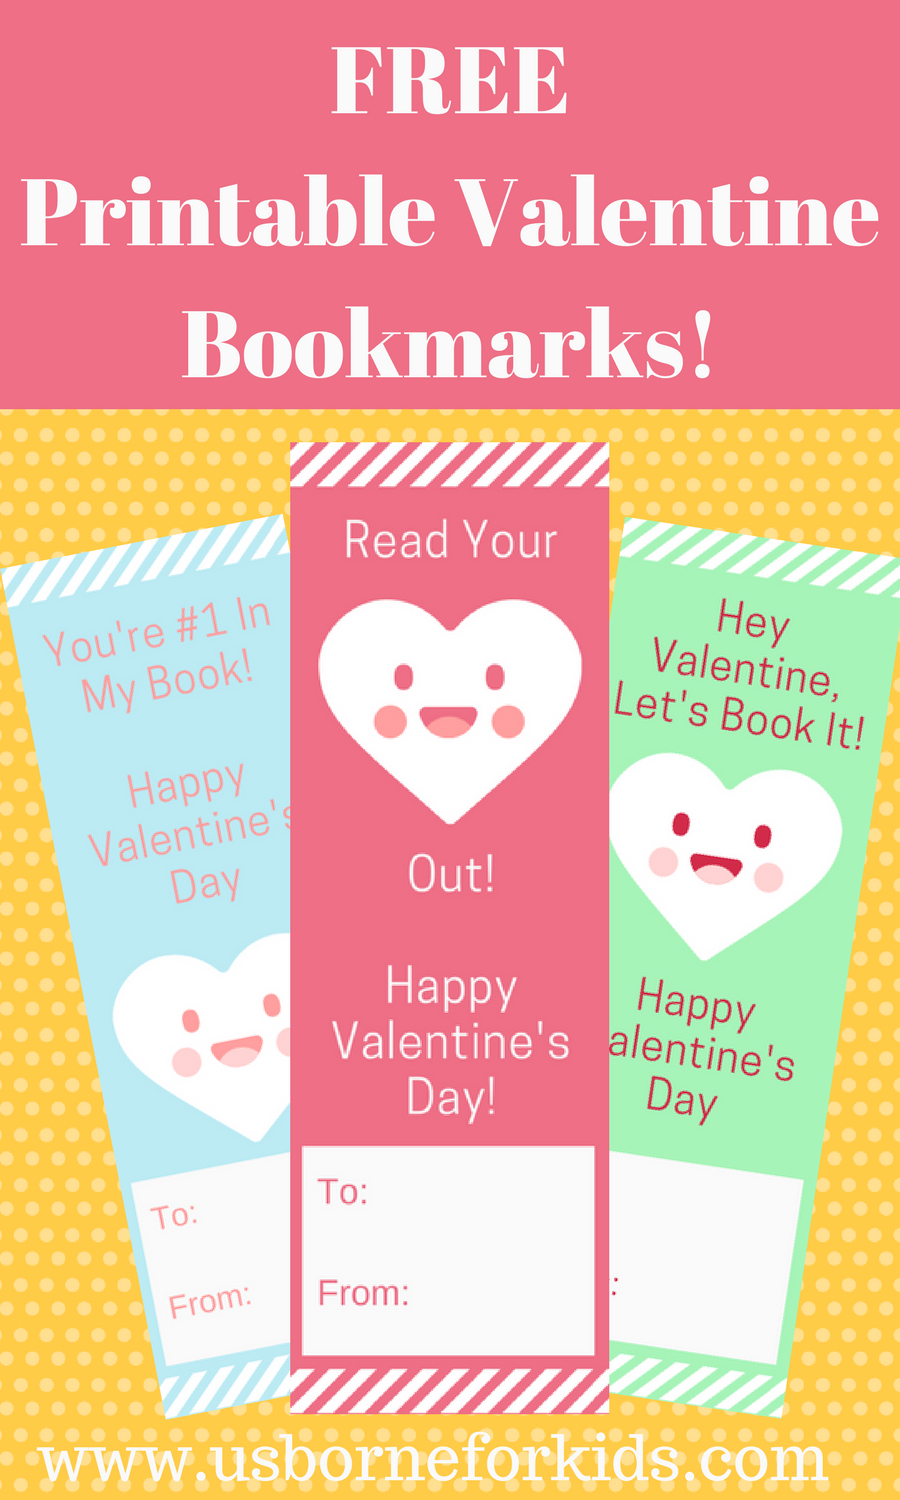 Valentine Bookmarks For Your Child&amp;#039;s Class! Mix And Match 6 - Free Printable Valentine Bookmarks